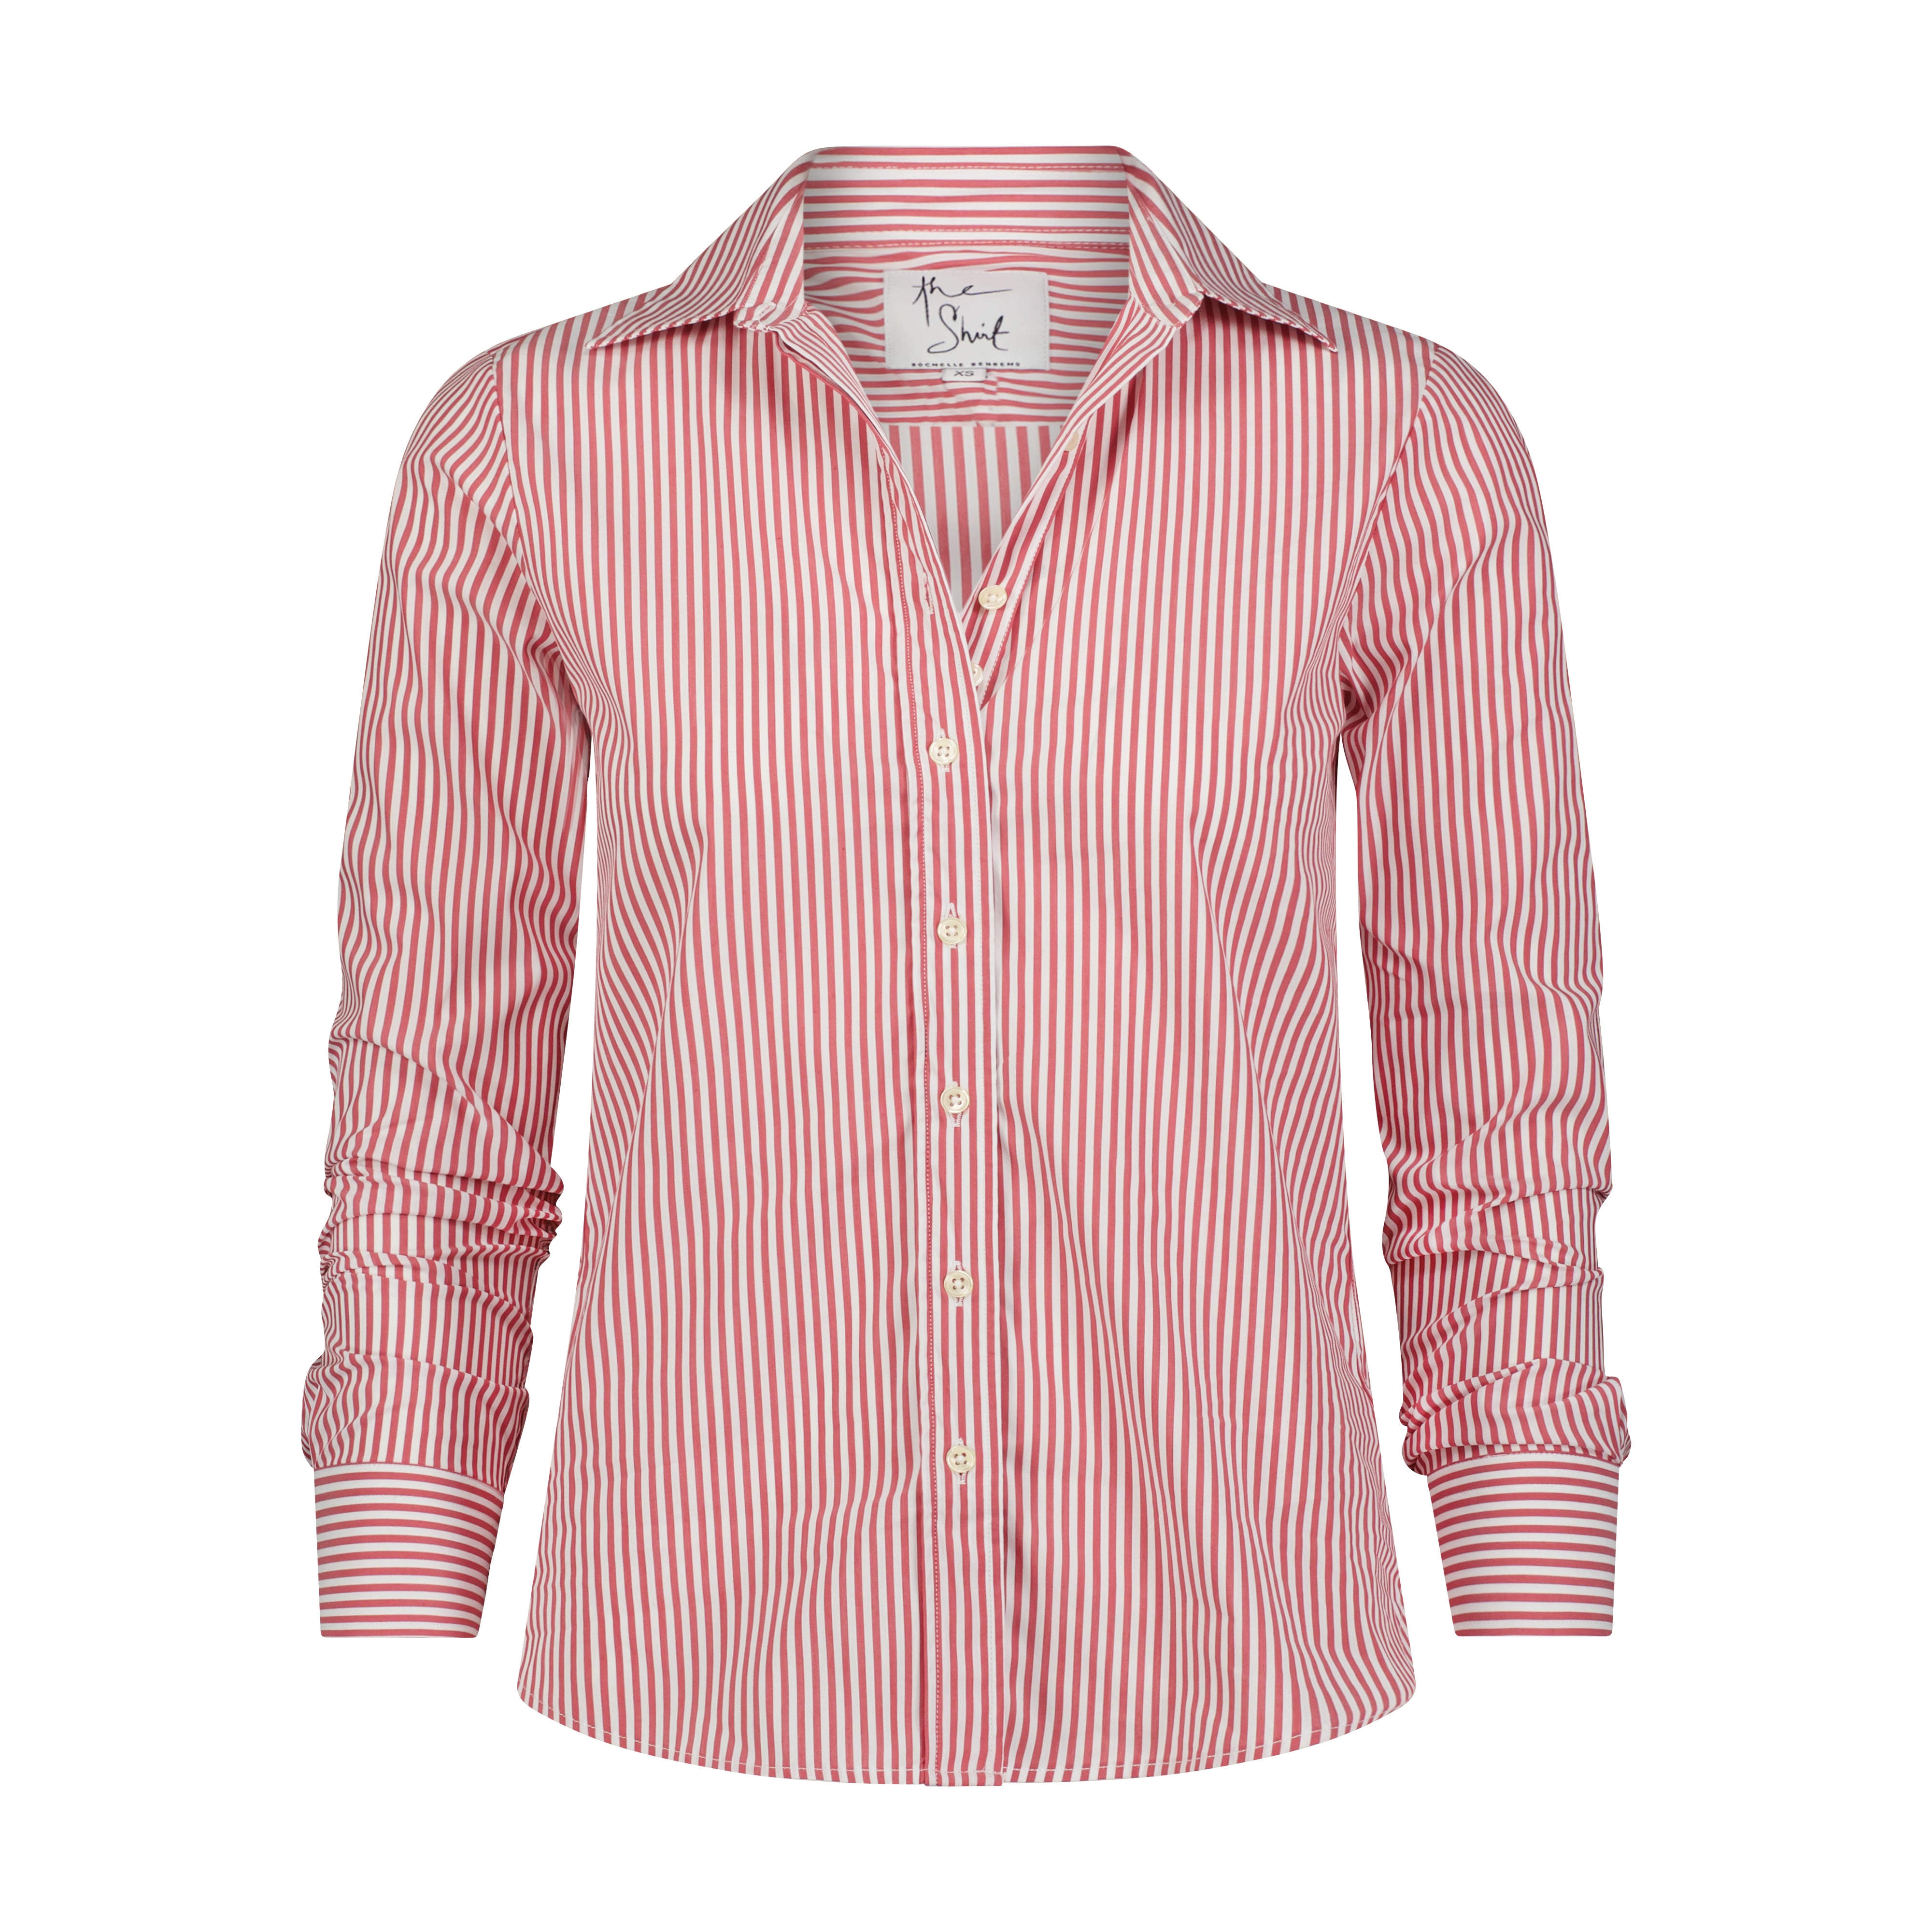 The Shirt by Rochelle Behrens - The Icon Shirt in Stripe - Red/White Stripe